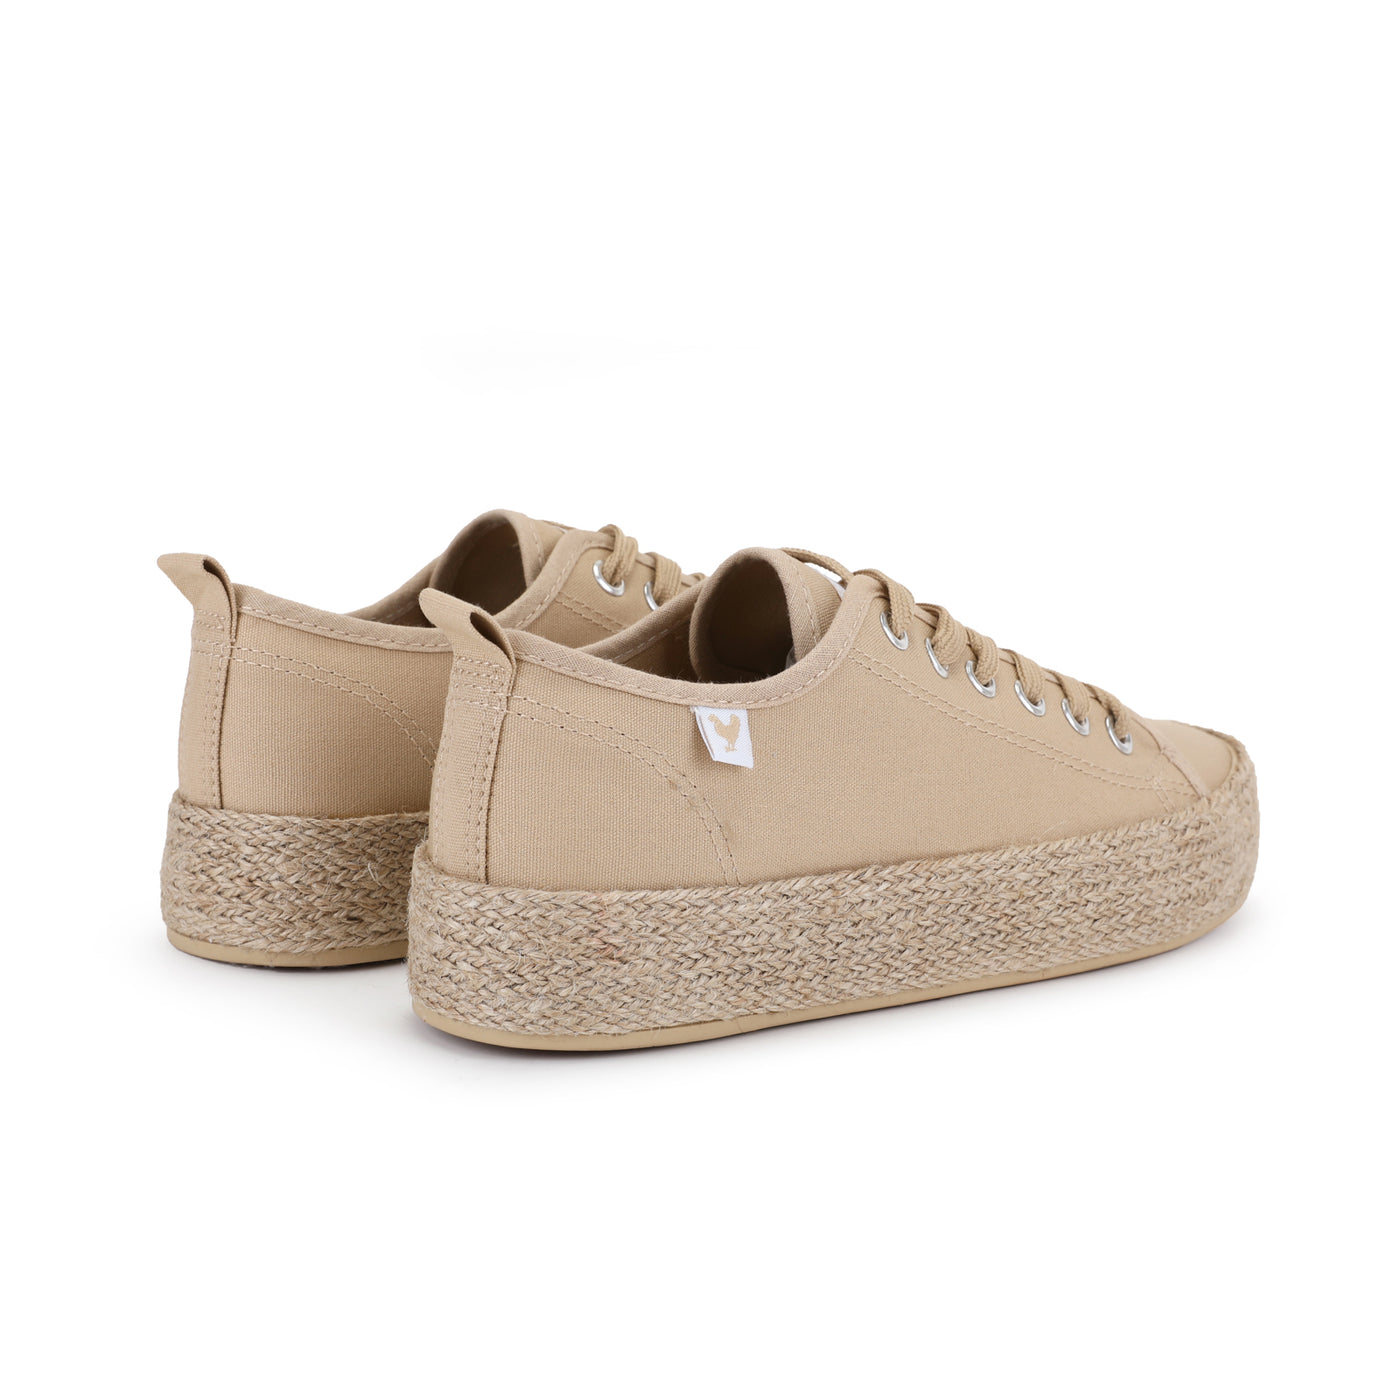 Caramel canvas lace-up espadrille sneakers